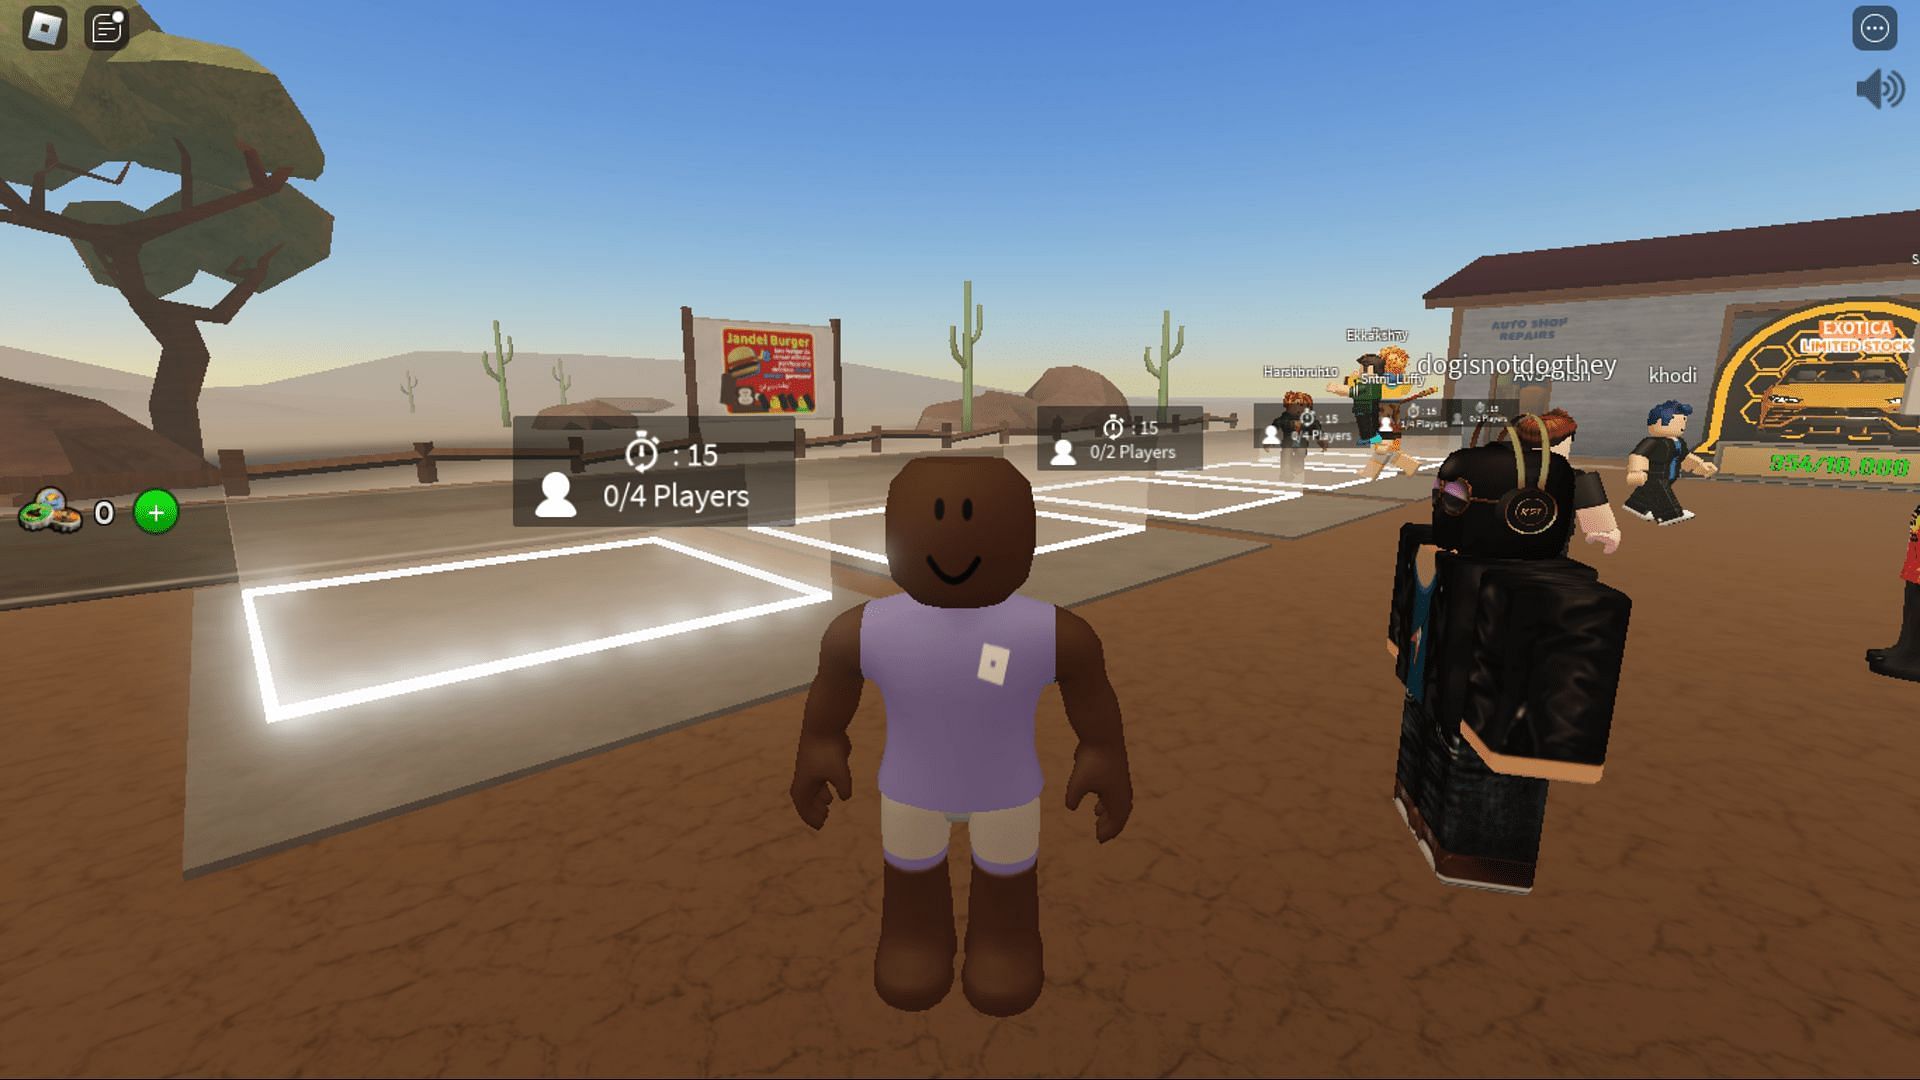 The spawn area in A Dusty Trip (Image via Roblox)